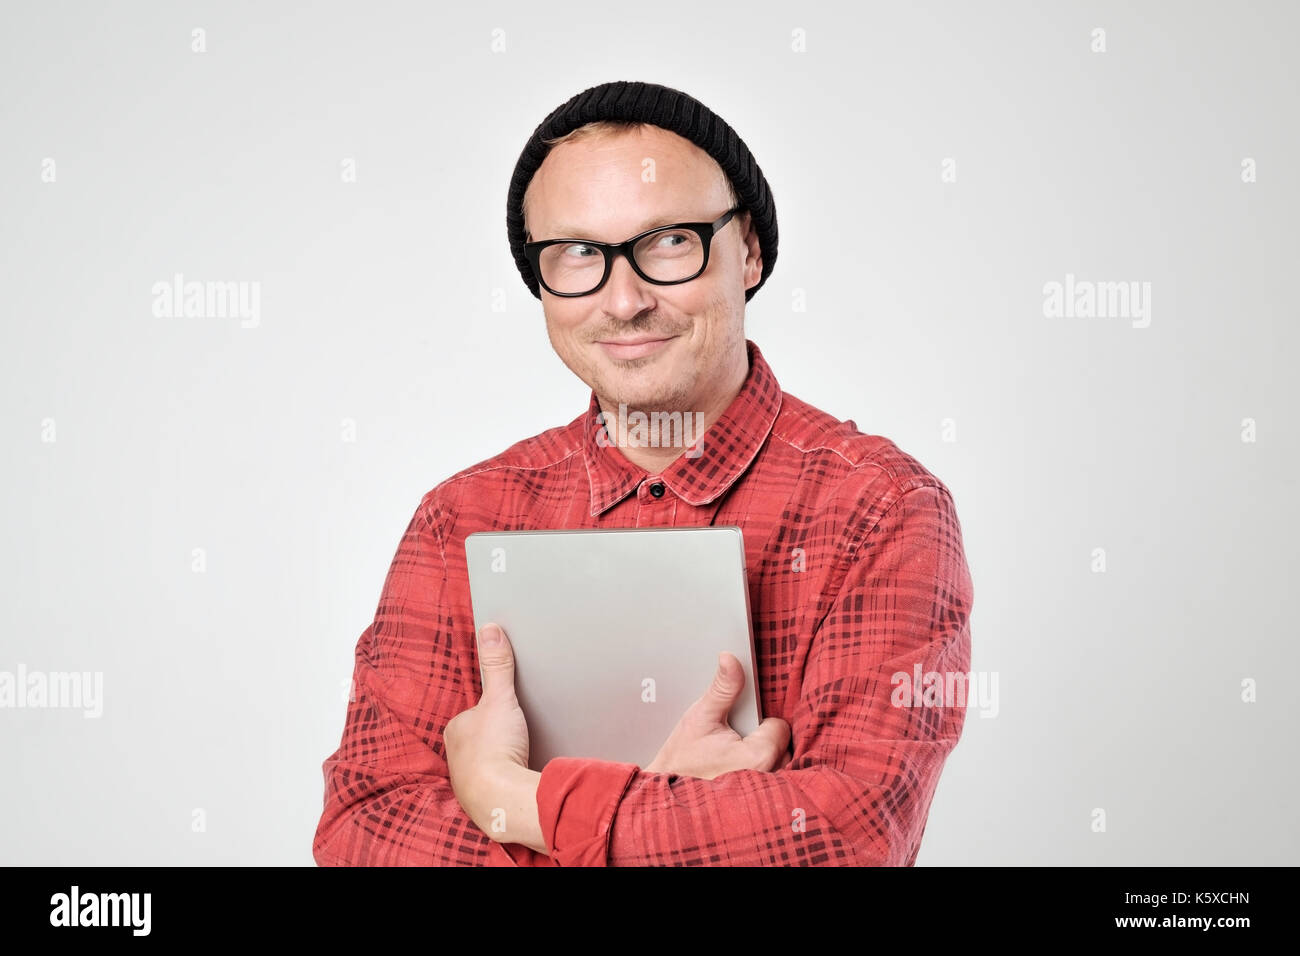 A young programmer in a black hat is holding a laptop in his han Stock Photo